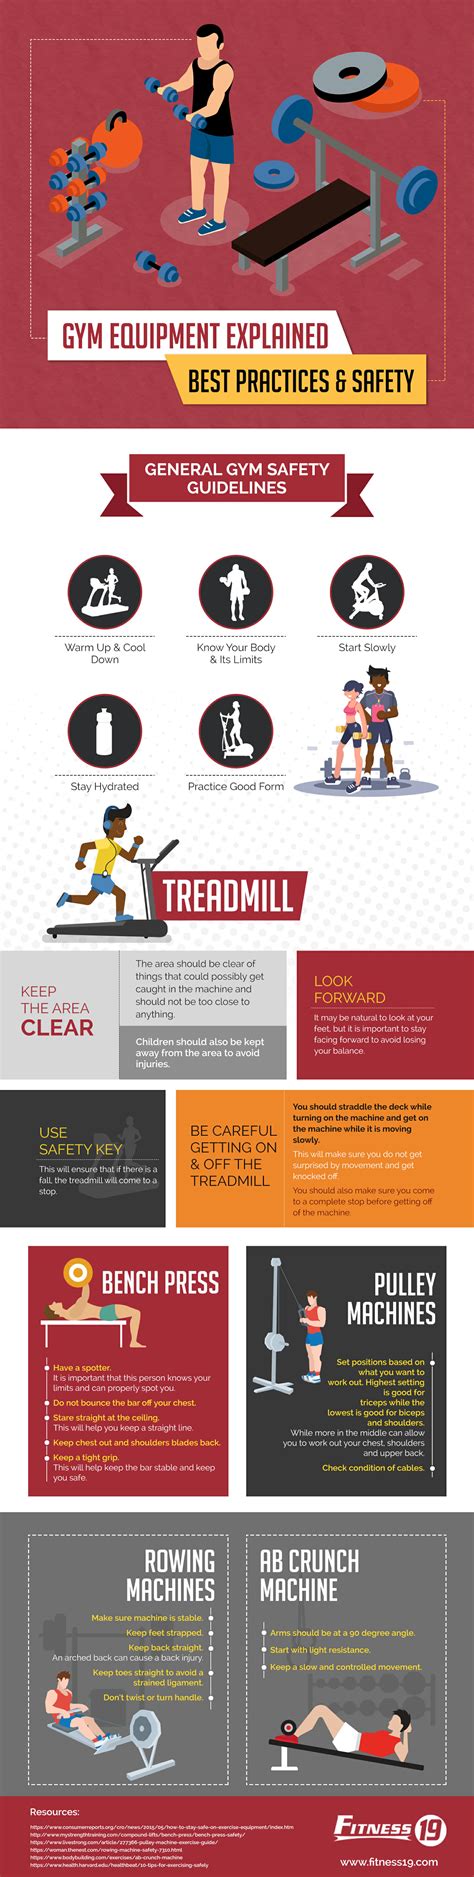 Gym Equipment Explained: Best Practices and Safety | Fitness 19 Gyms